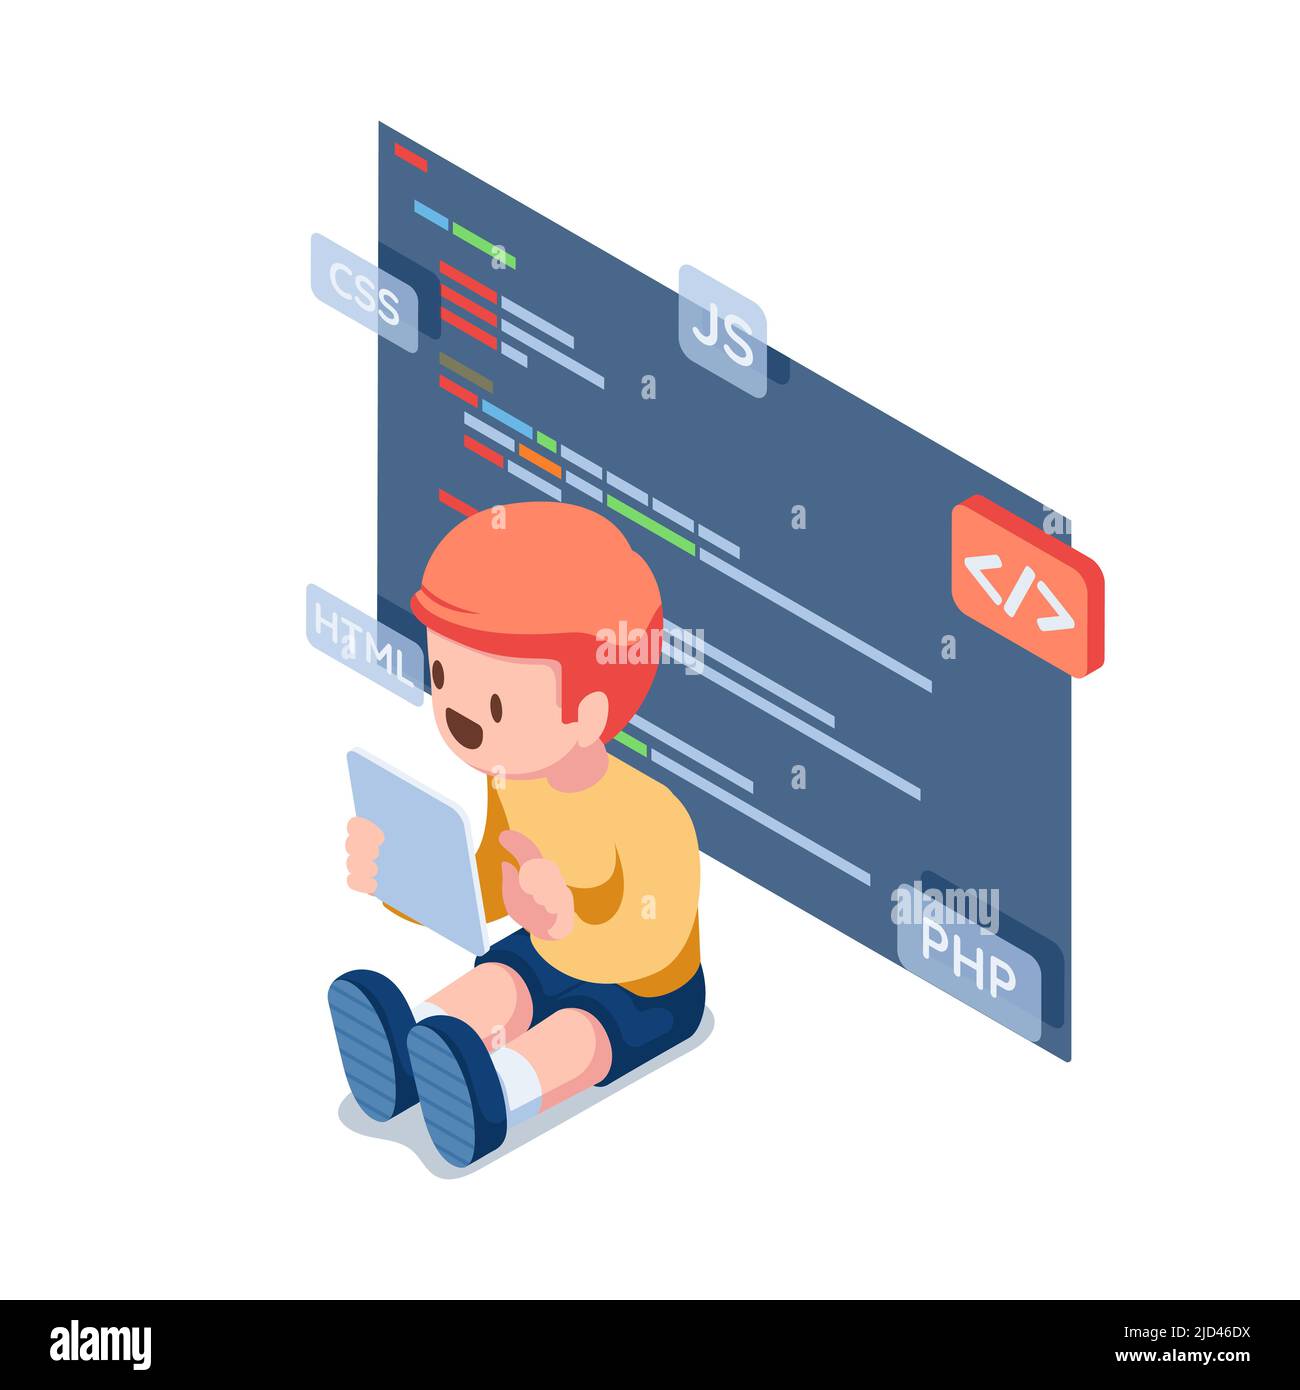 Flat 3d Isometric Kids Coding and Programing on Digital Tablet. Computer Programmer Education for Kids Concept Stock Vector